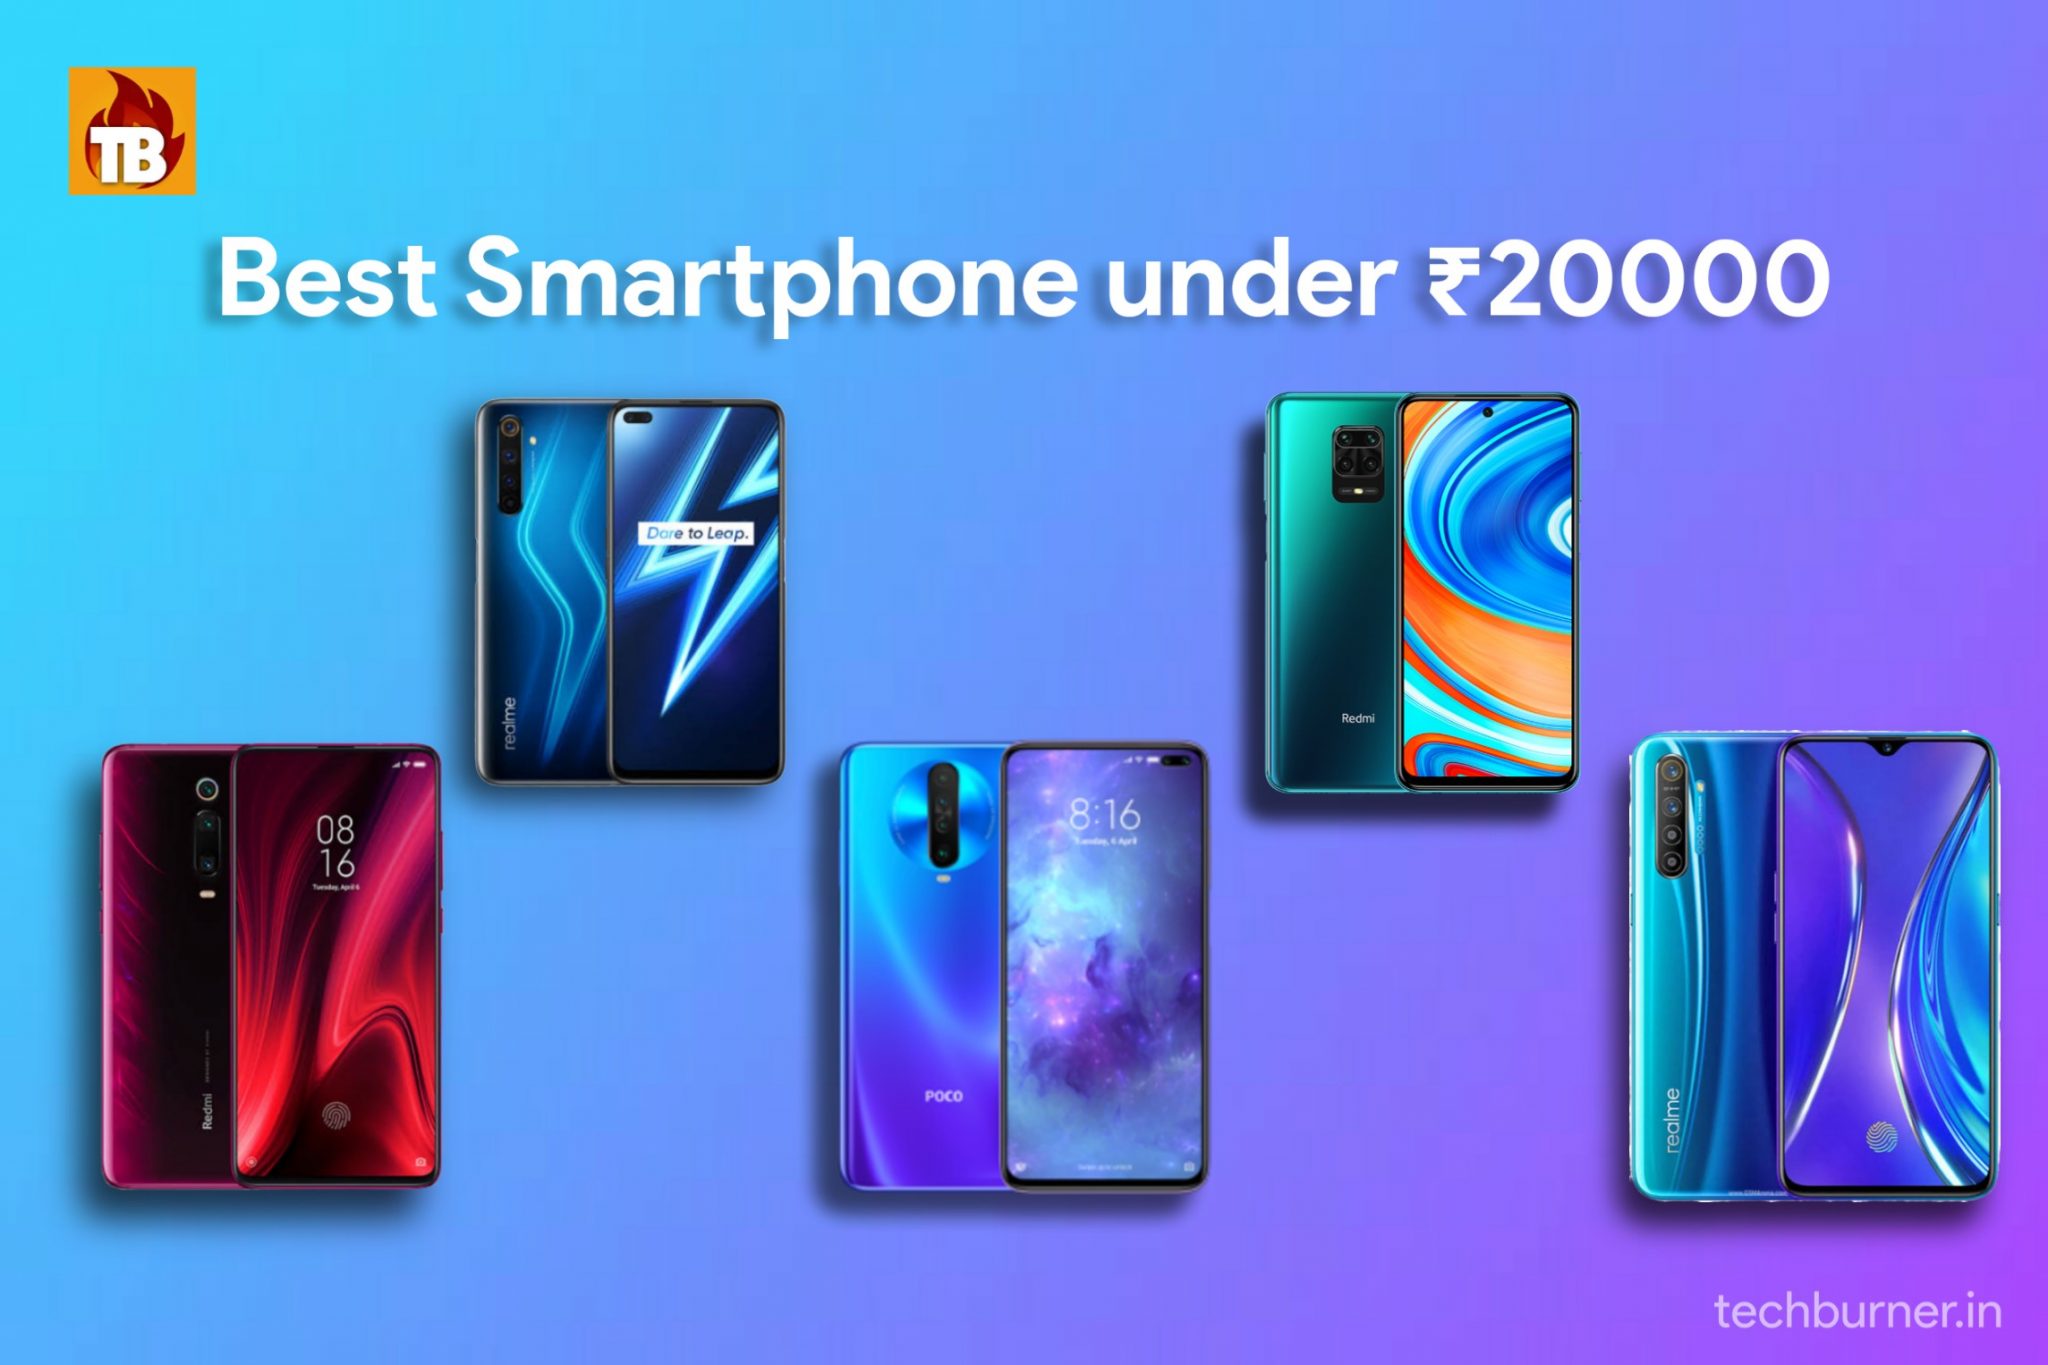 Top 5 Best Smartphone Under Rs 20,000 in India May 2020 TechBurner